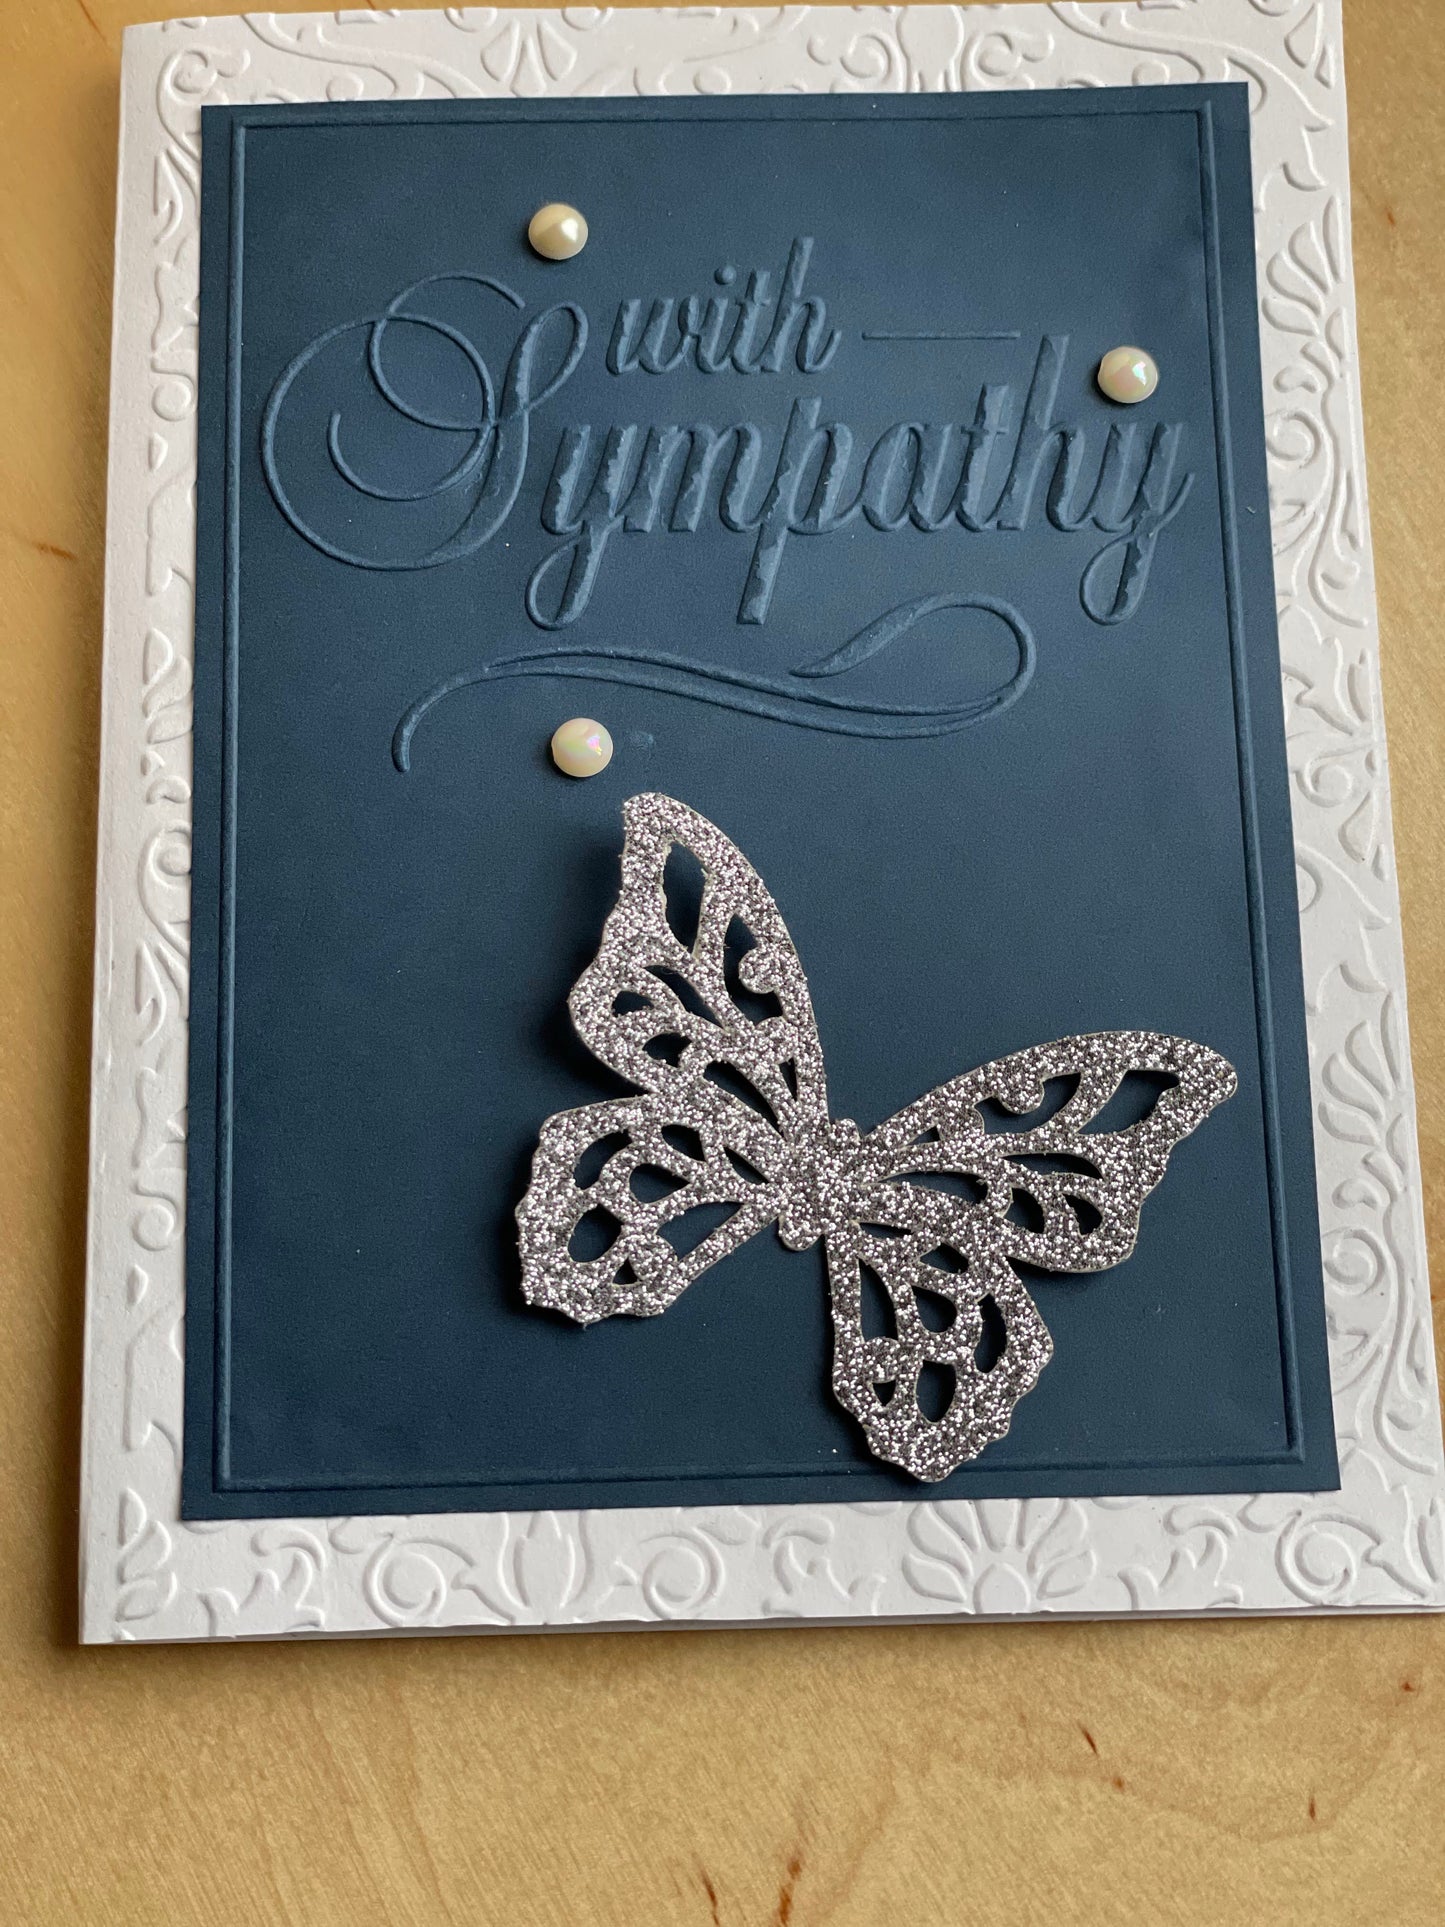 Two Anointed Hands - Sympathy Card